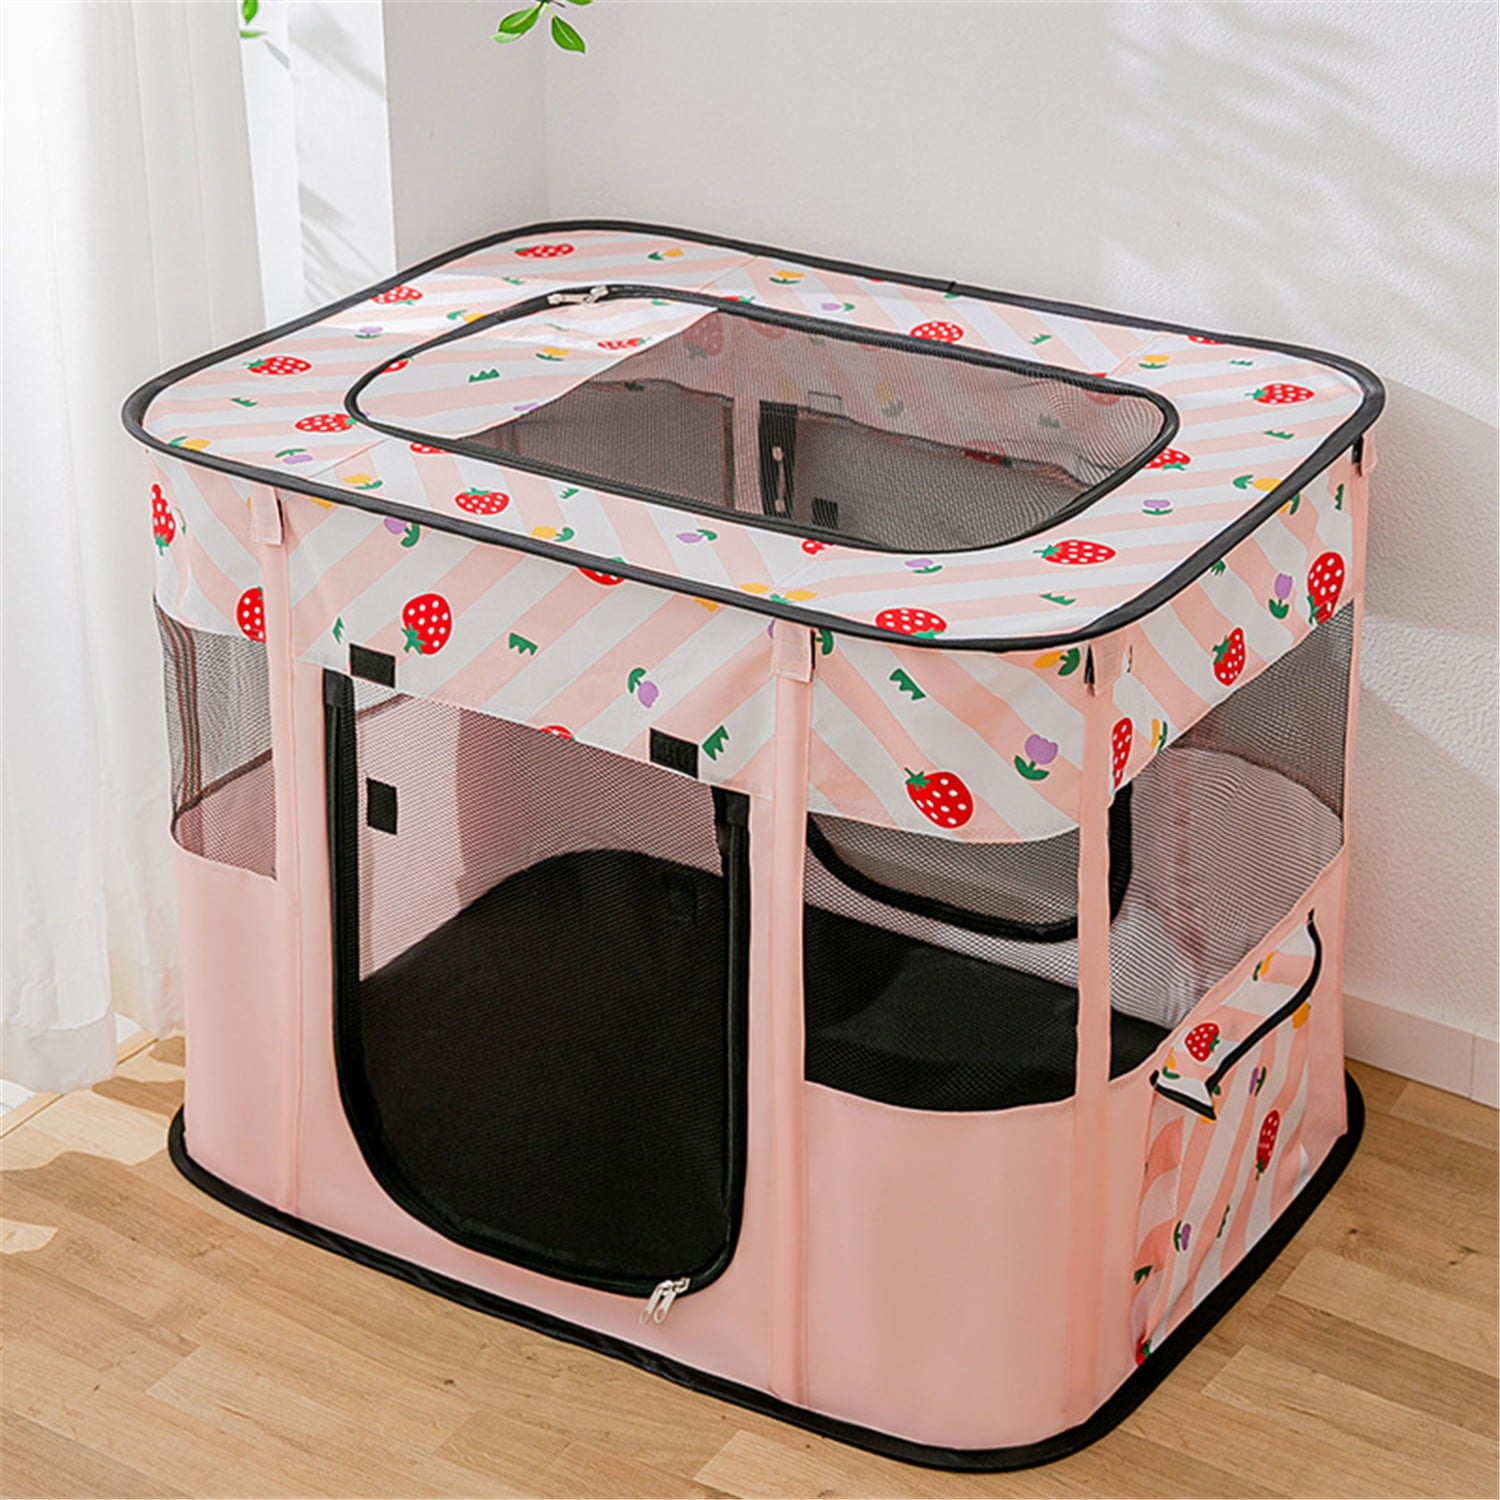 Portable Dog Playpen|  Dog House Indoor Outdoor| Pet Playpen for Small Dogs| Dog Travel Accessories Cat Kennel